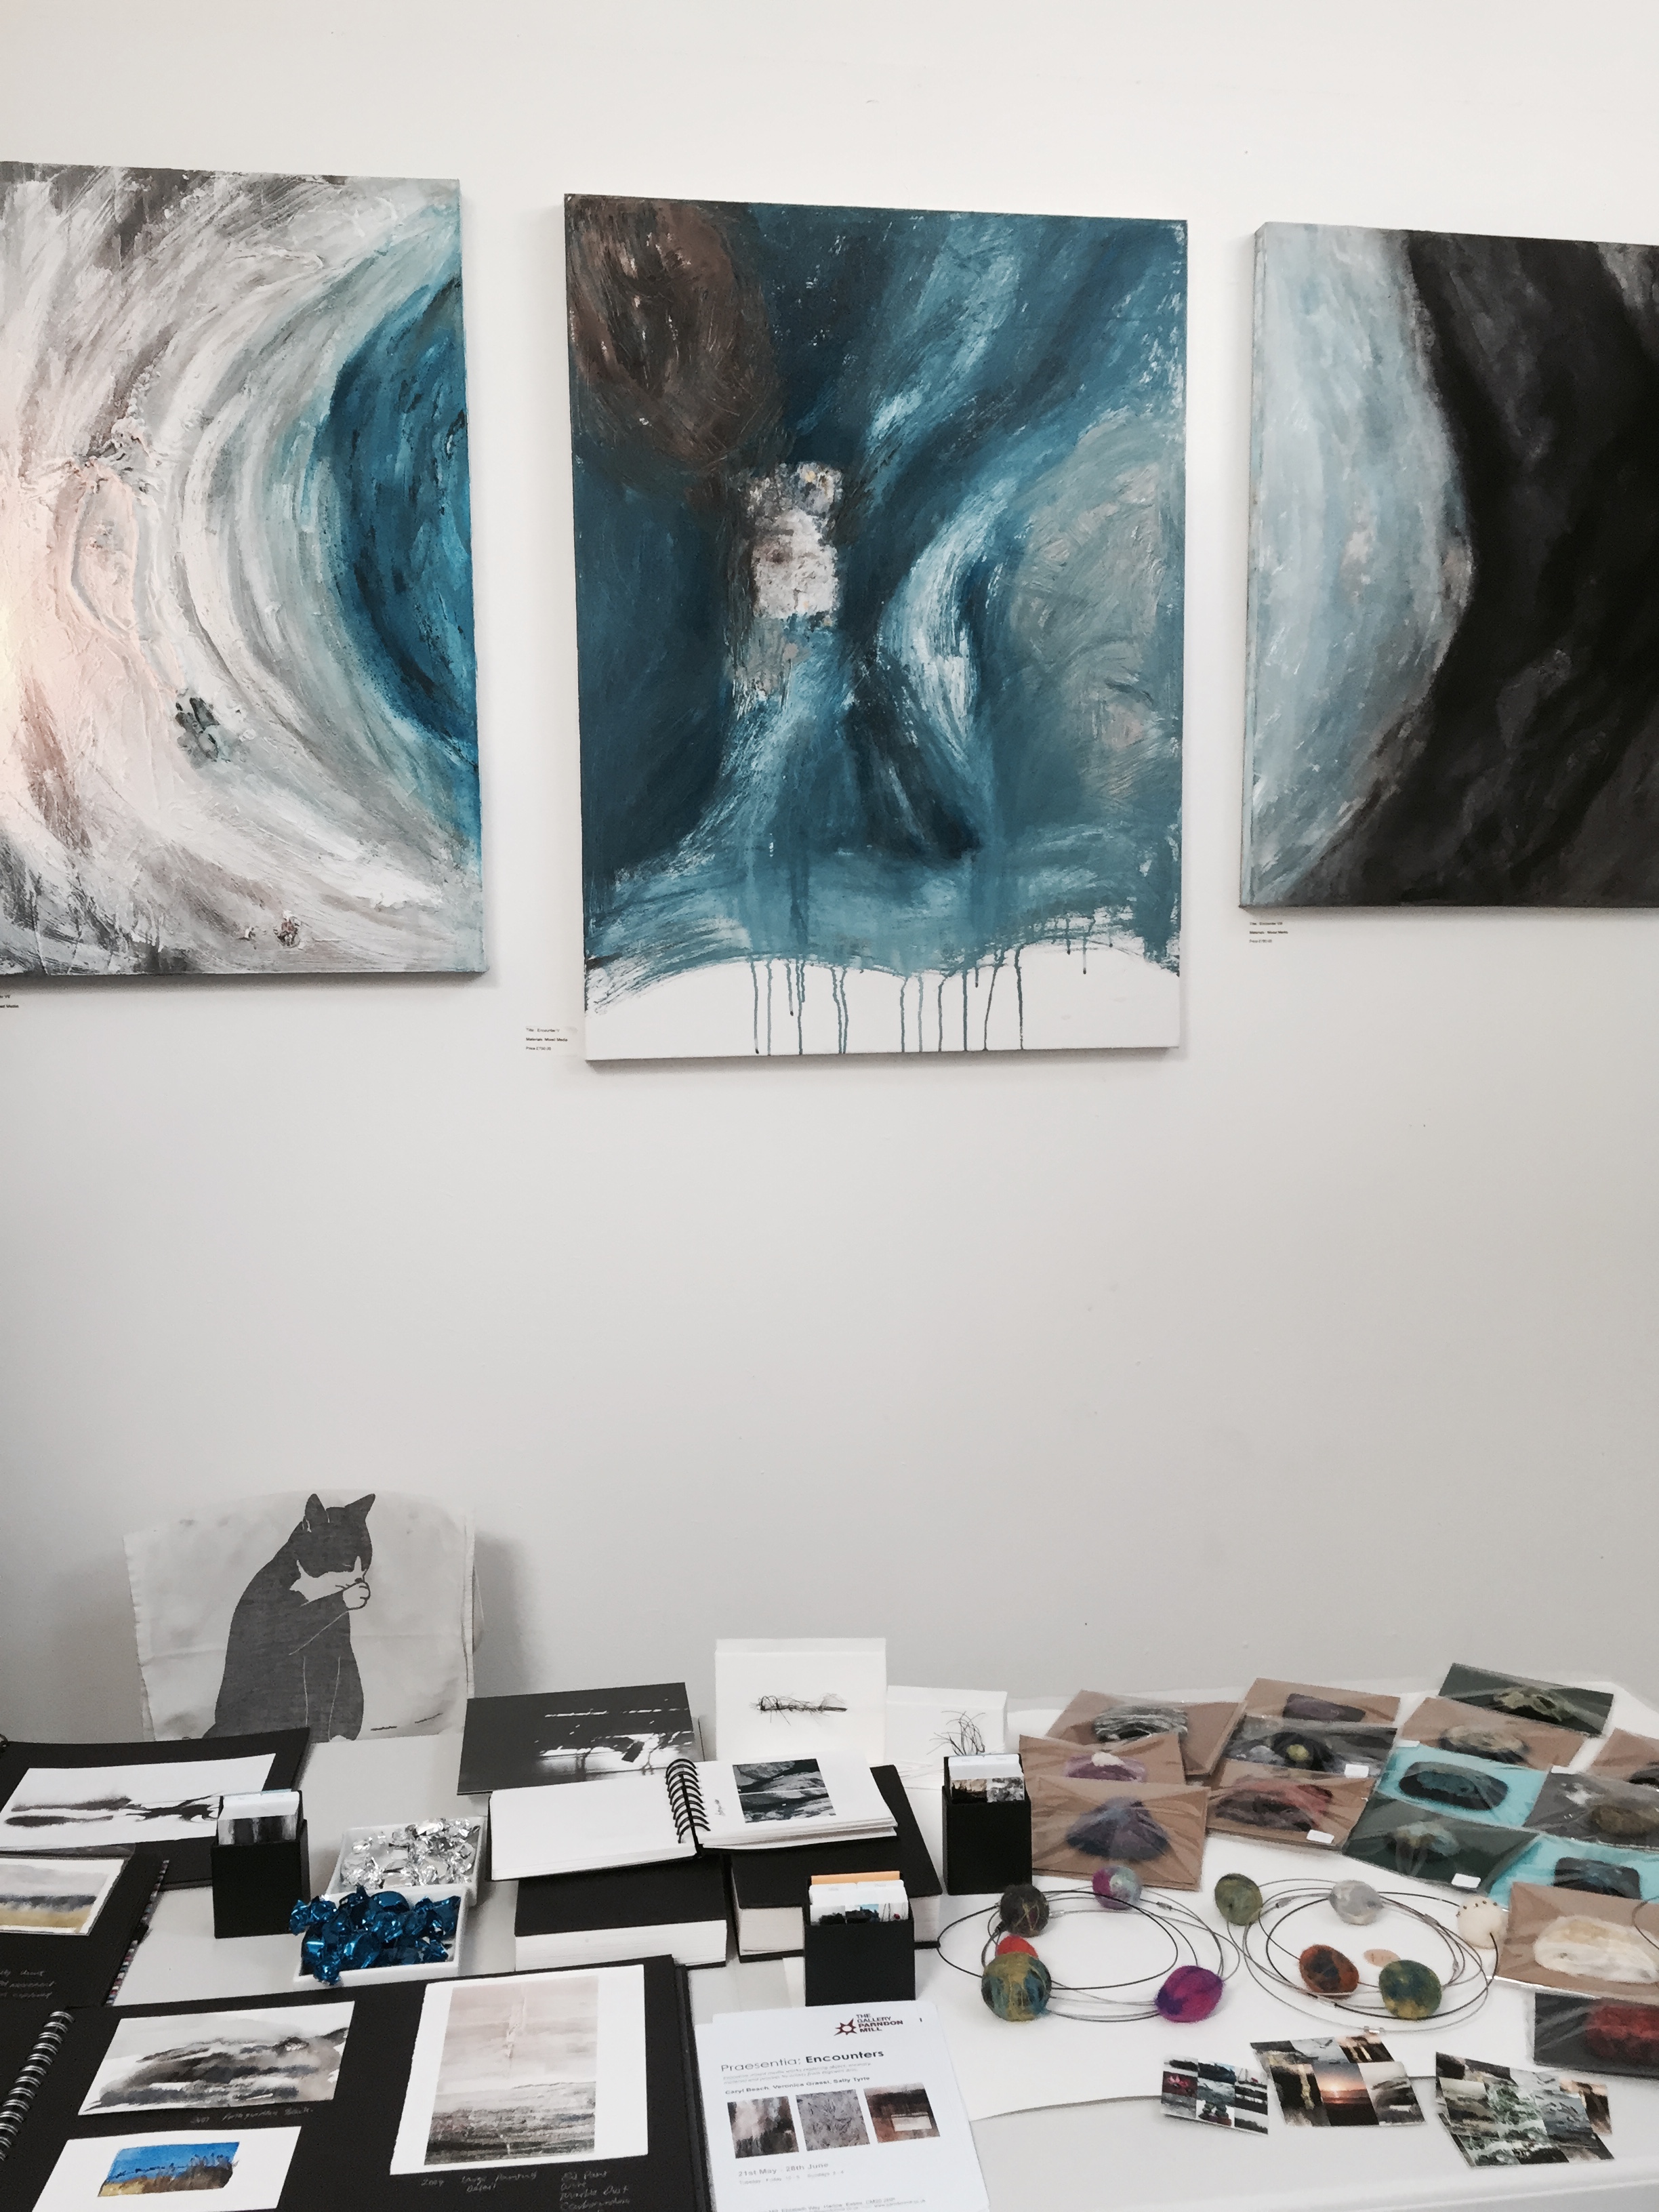 Open Studios at The Forge Digswell Arts